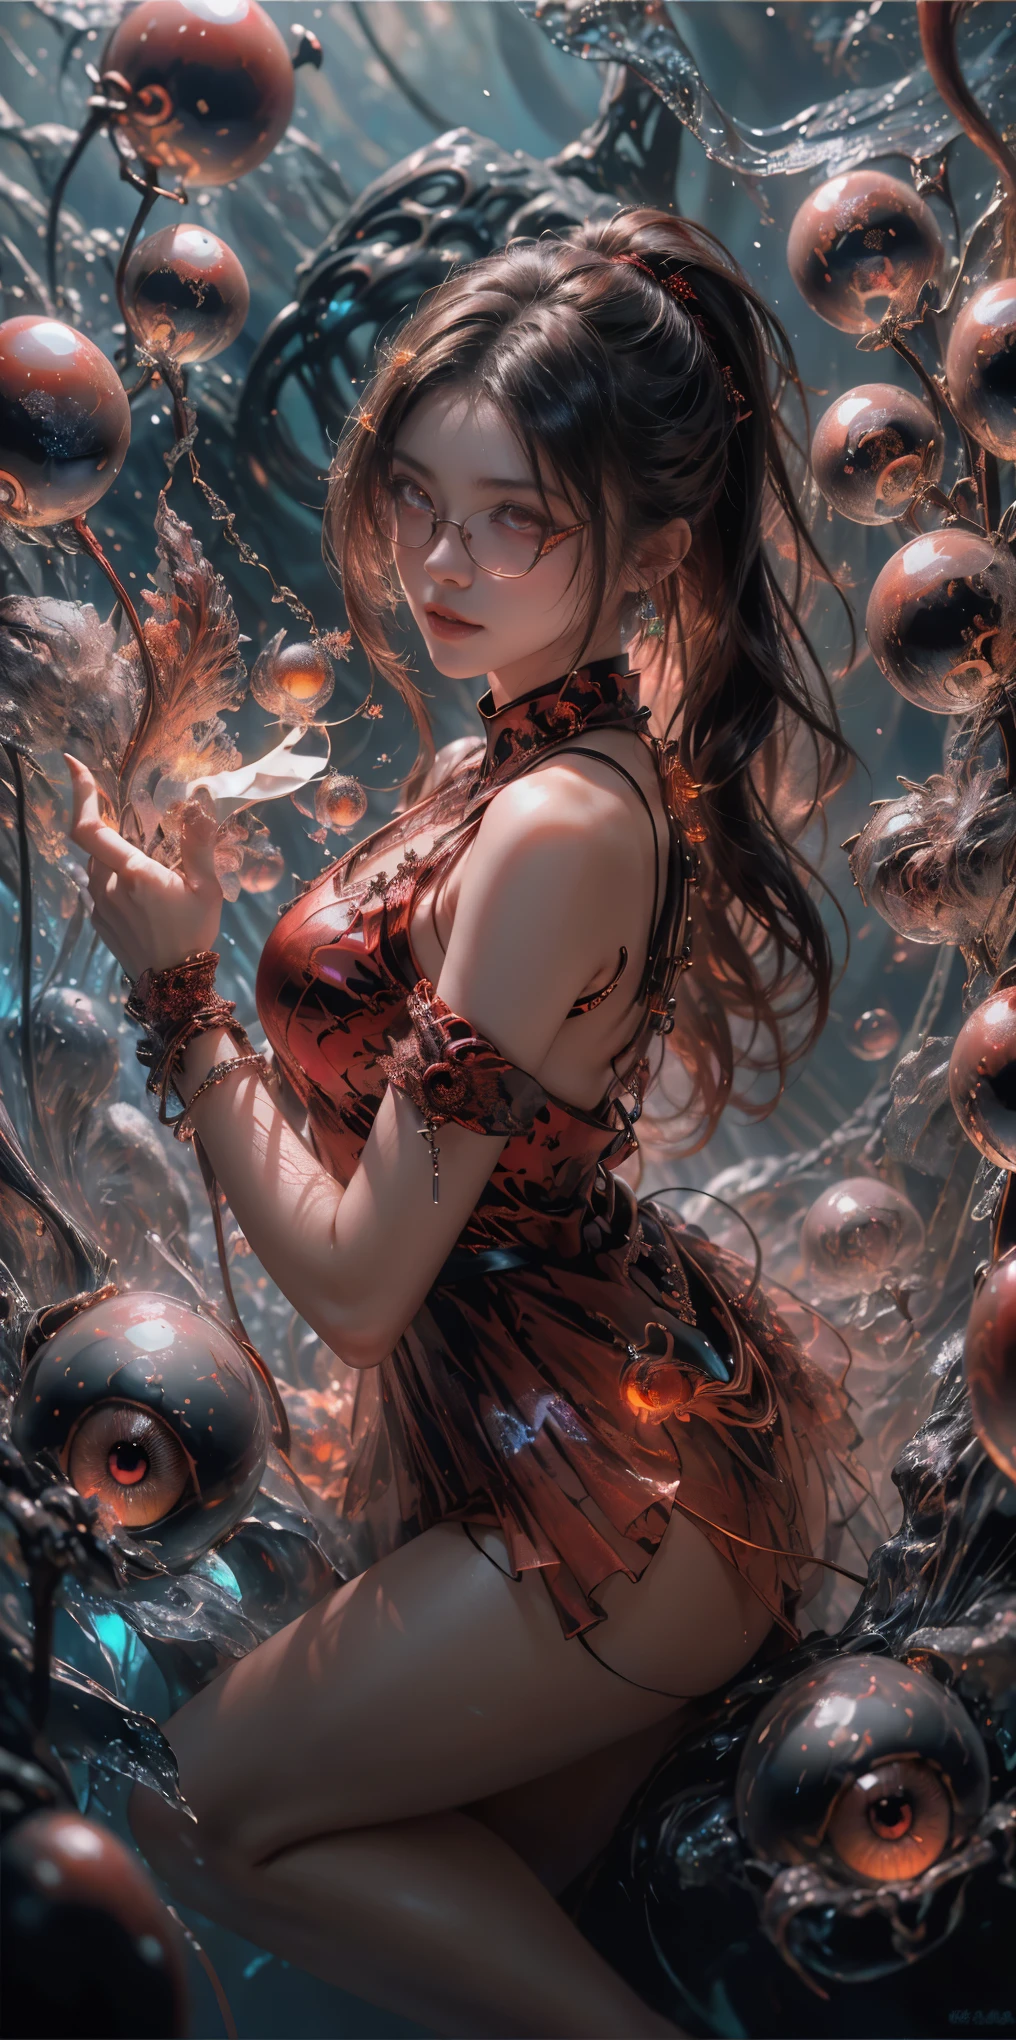 (The best illustrations)、realisitic、ultra-detailliert、The best lighting、Best Shadows、alluring succubus, ethereal beauty, perched on a cloud, (fantasy illustration:1.3), enchanting gaze, captivating pose, delicate wings, otherworldly charm, mystical sky, (Luis Royo:1.2), (Yoshitaka Amano:1.1), Dungeon and Dragon、caves、Dungeon、 A Necromancer、natta、Dark style、Succubus、Devil's Daughter、Bat Wings，(((Demon Hornlack-rimmed round glasses))))、(red eyes glowing:1.6)、​beautiful countenance、Tindall Effect、(High Detail Skins:1.2) absurderes、Ponytail distortion、jewely、Beautiful expression、Toned waist、Wide buttocks、Tindall Effectmasuter piece、top-quality、Highest Standards、Top image quality、masutepiece、intricate detailes、High resolution、Depth Field、natural soft light、profetional lighting、Great smile、(High Detail Skin: 1.2)、photorealistic anime girl render、Strong highlights of the eyes、Perfect Anatomy、crotch open、Shy、Spreading your legs、Panties are visible、Skirt flipping、Body shiny with oilerectile nipple))、8K resolution、intricate clothing、Intricate details